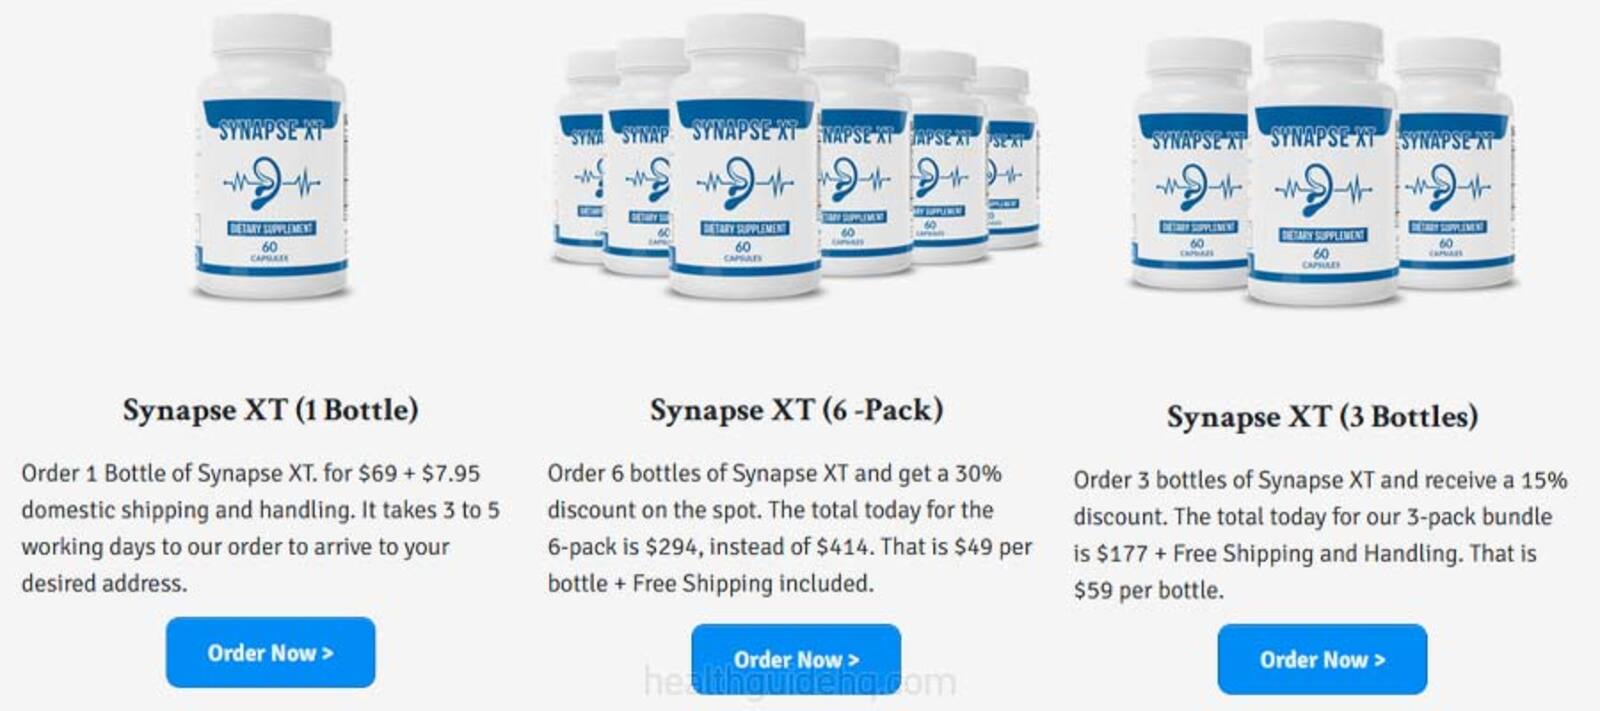 Where To Buy Synapse XT?